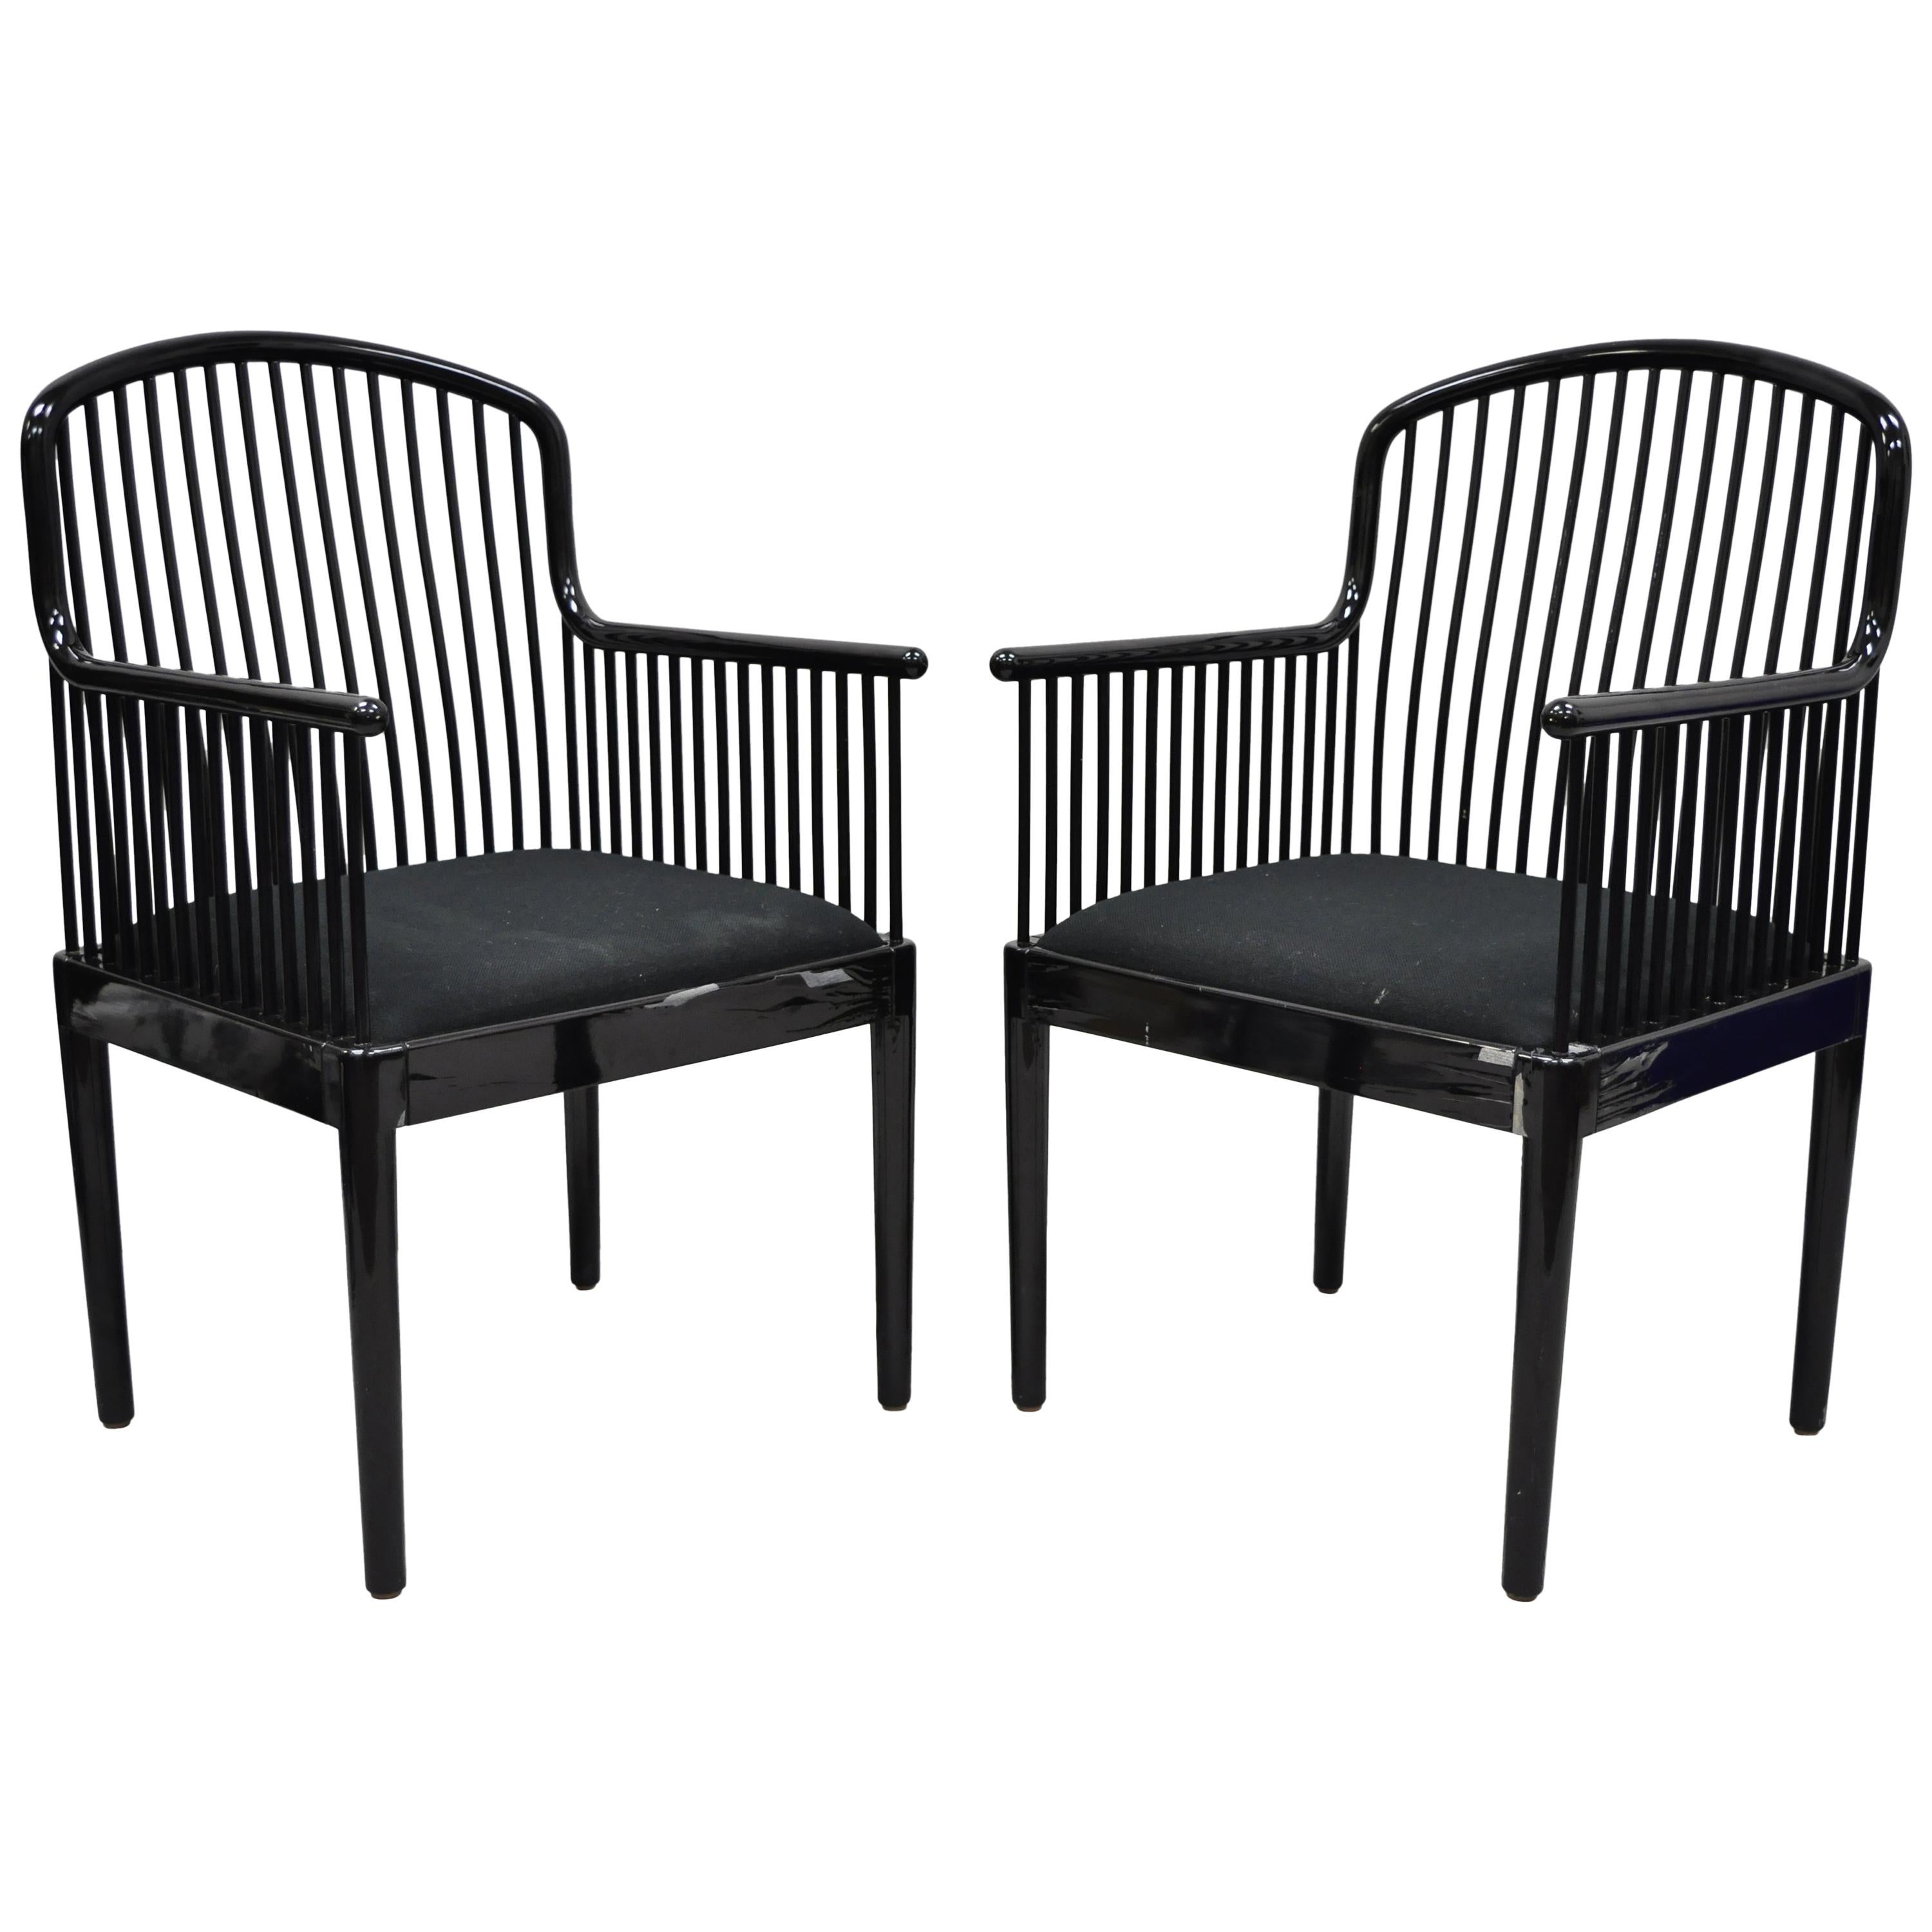 Pair of Black Lacquer Modern Andover Armchairs by Davis Allen for Stendig 'C'